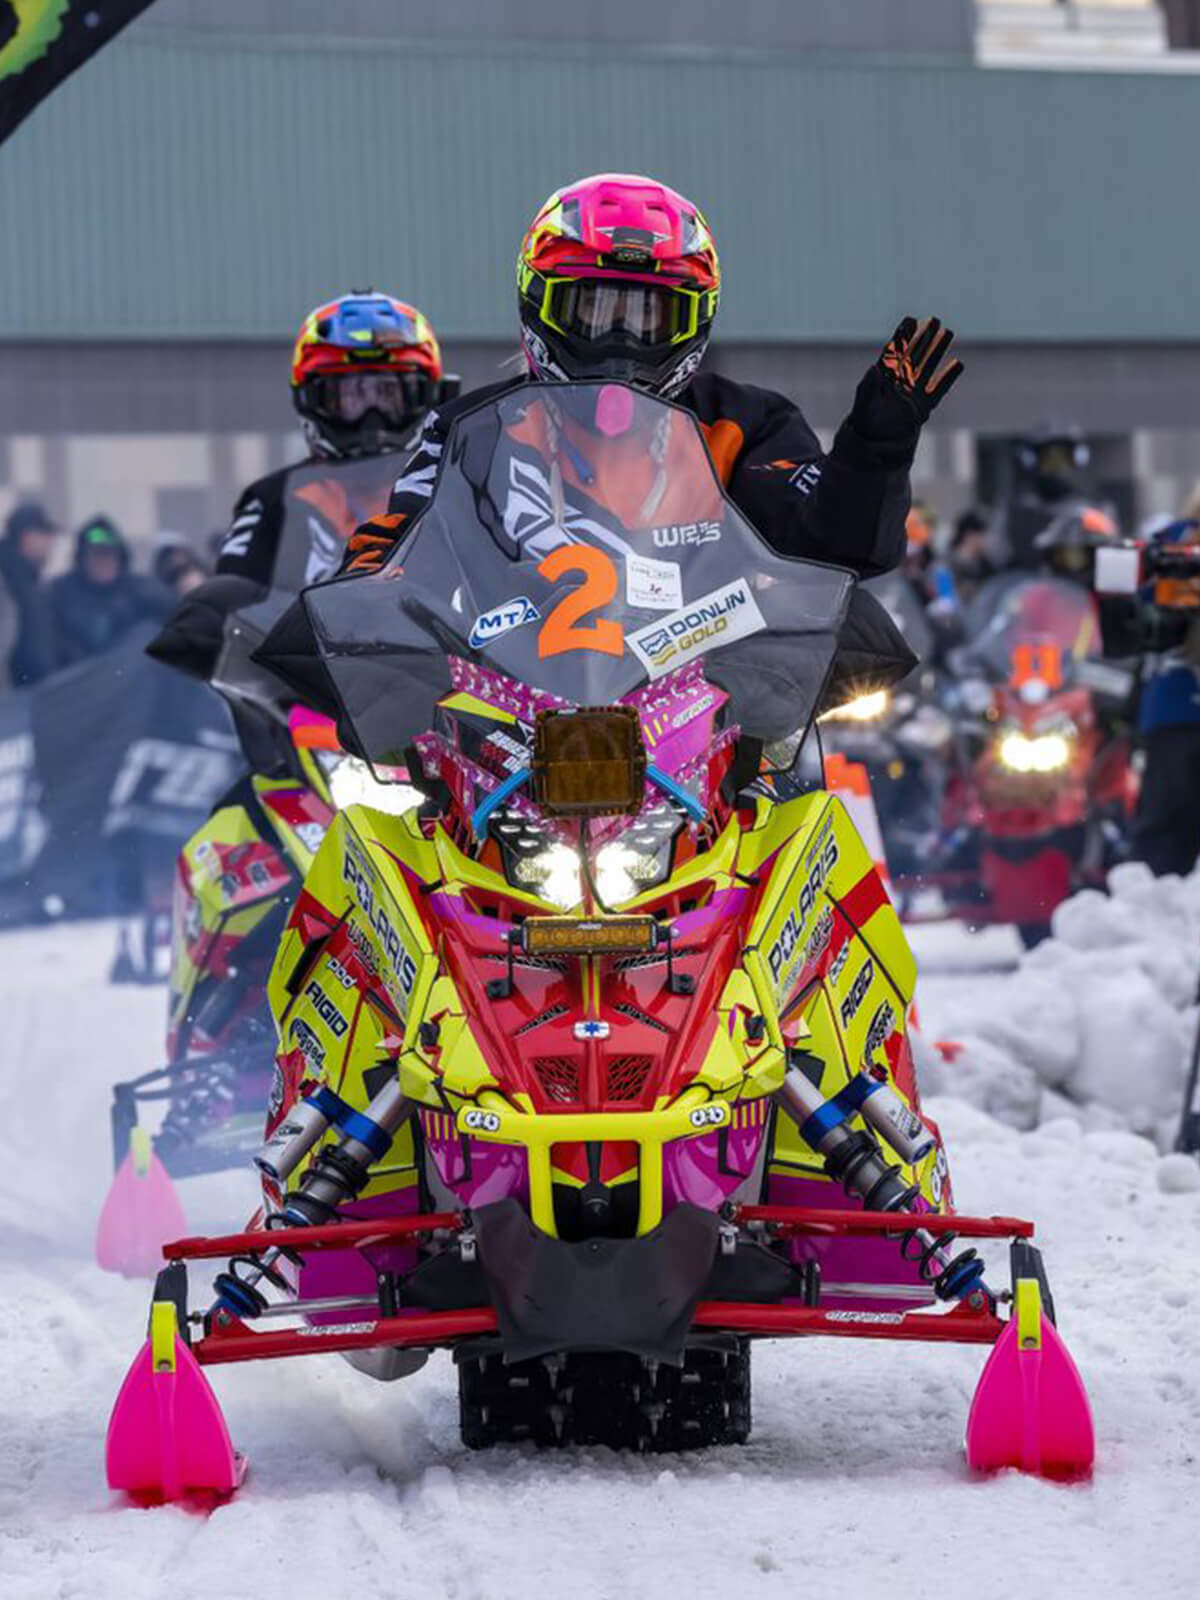 Leah Bauer and Jacob Dahle racing the Iron Dog with pink and yellow Polaris snowmobiles and Pink C&A Pro XPT Skis 